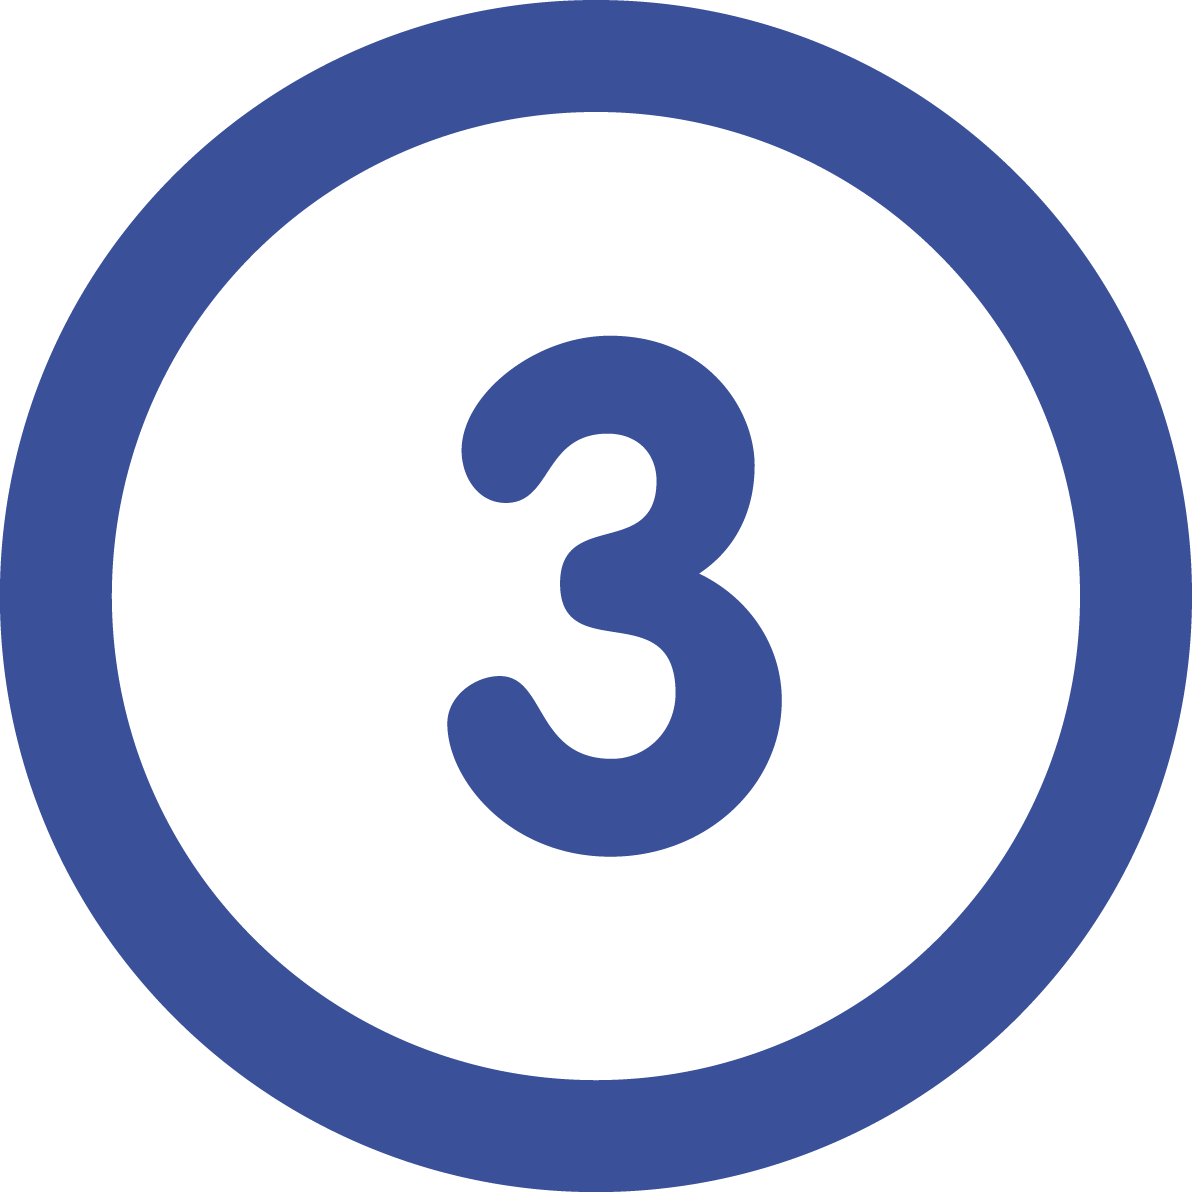 Blue number 3 designed by Freepik from Flaticon